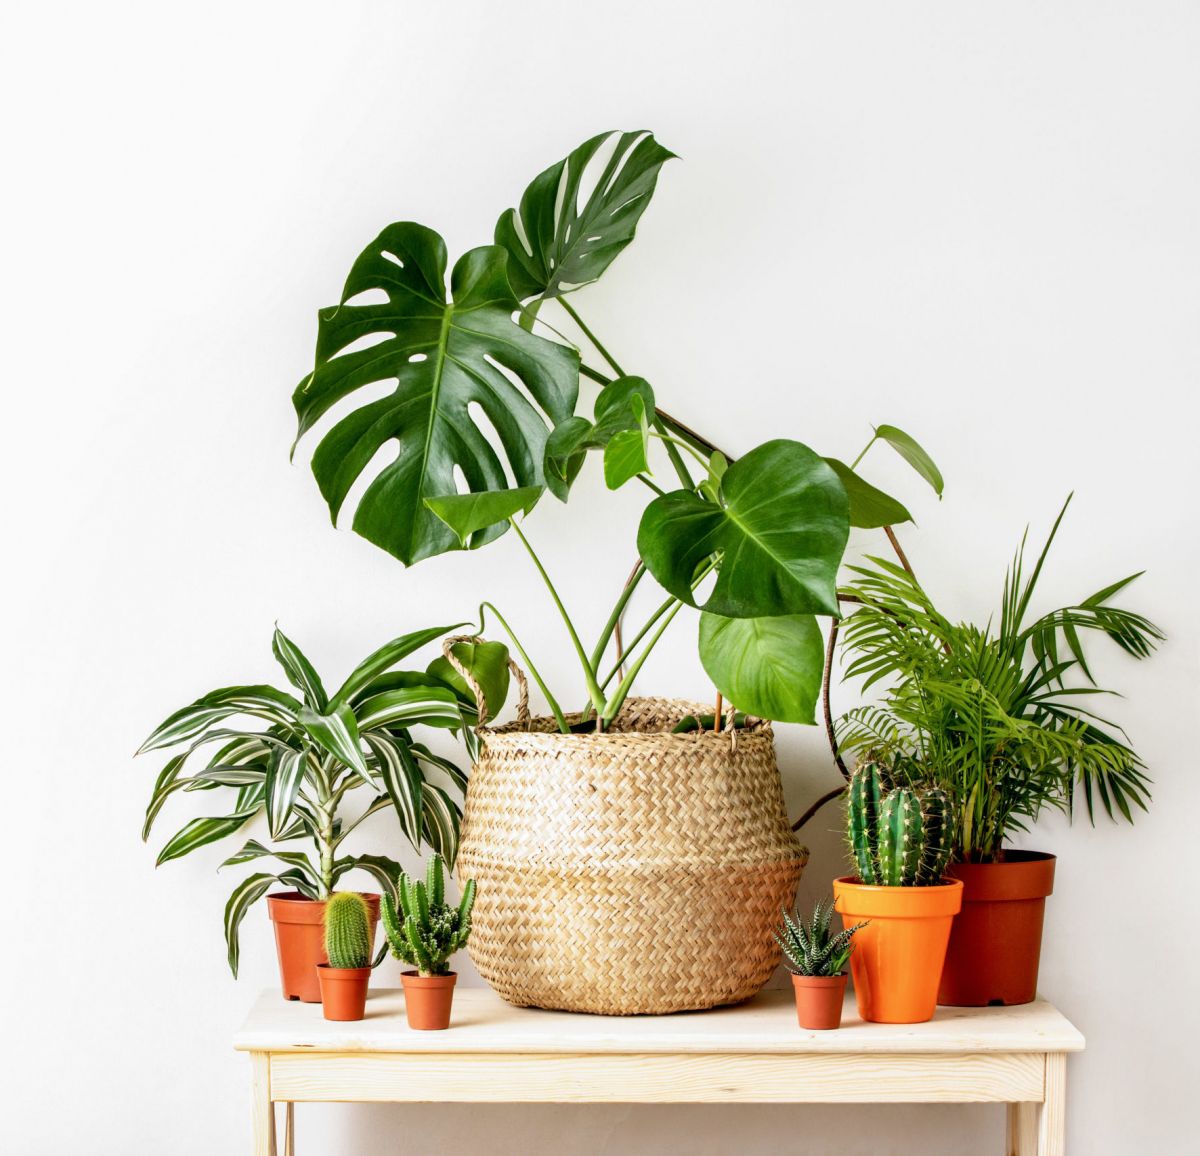 Greeny home decor tips; houseplants for beginners